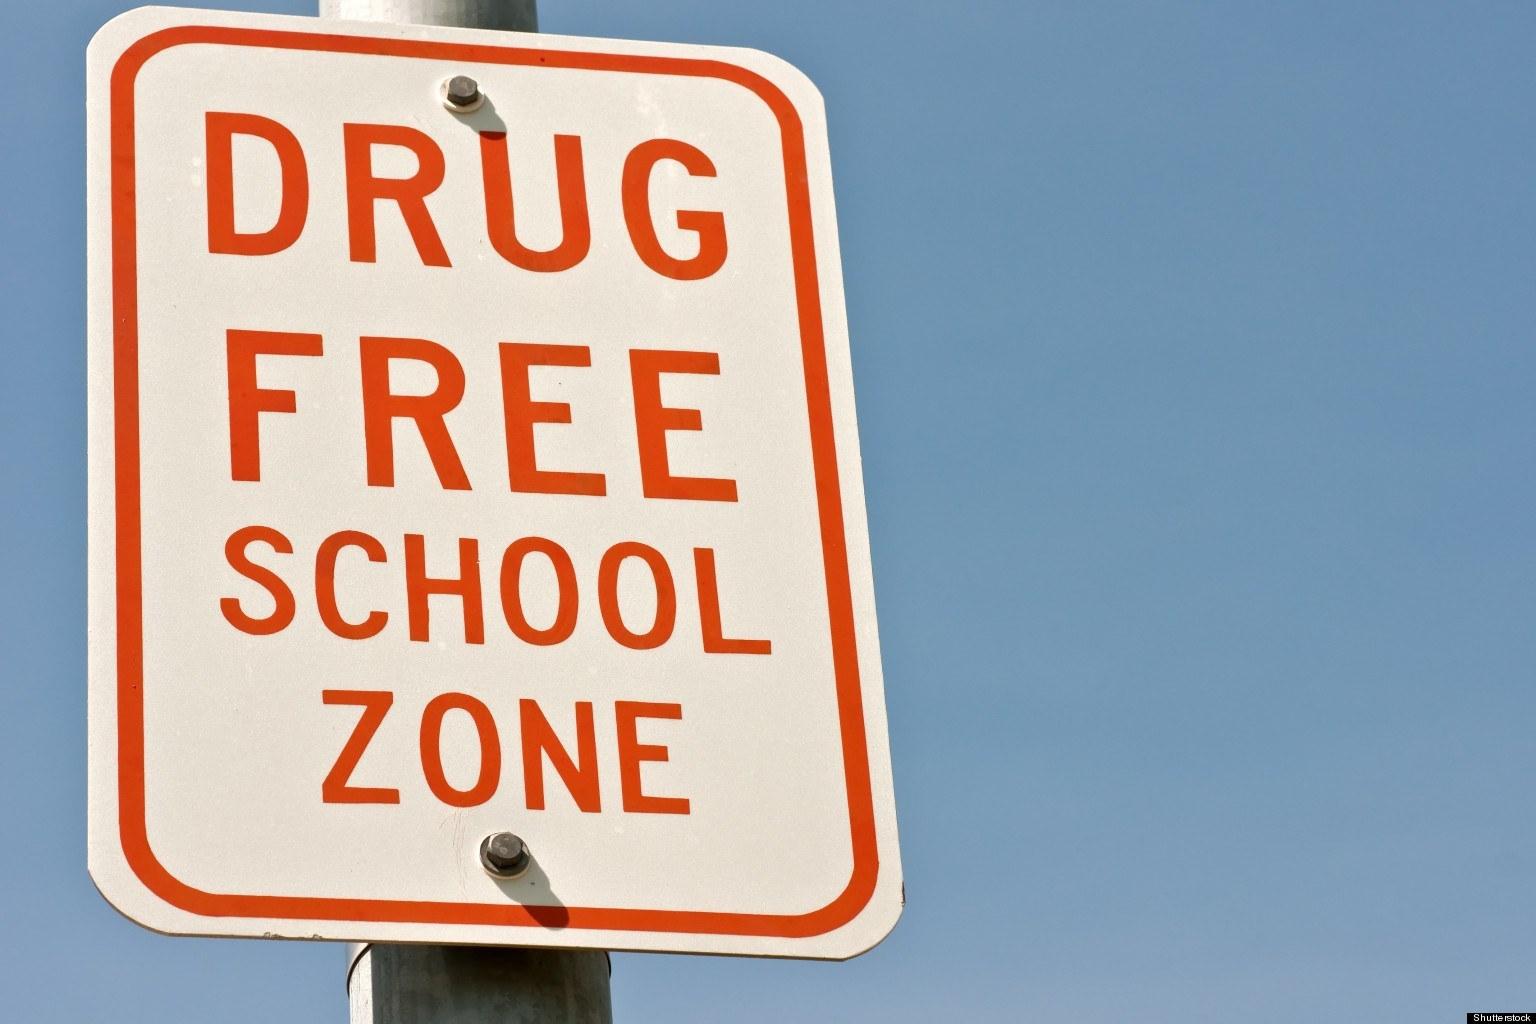 Image of a Drug Free School Zone sign